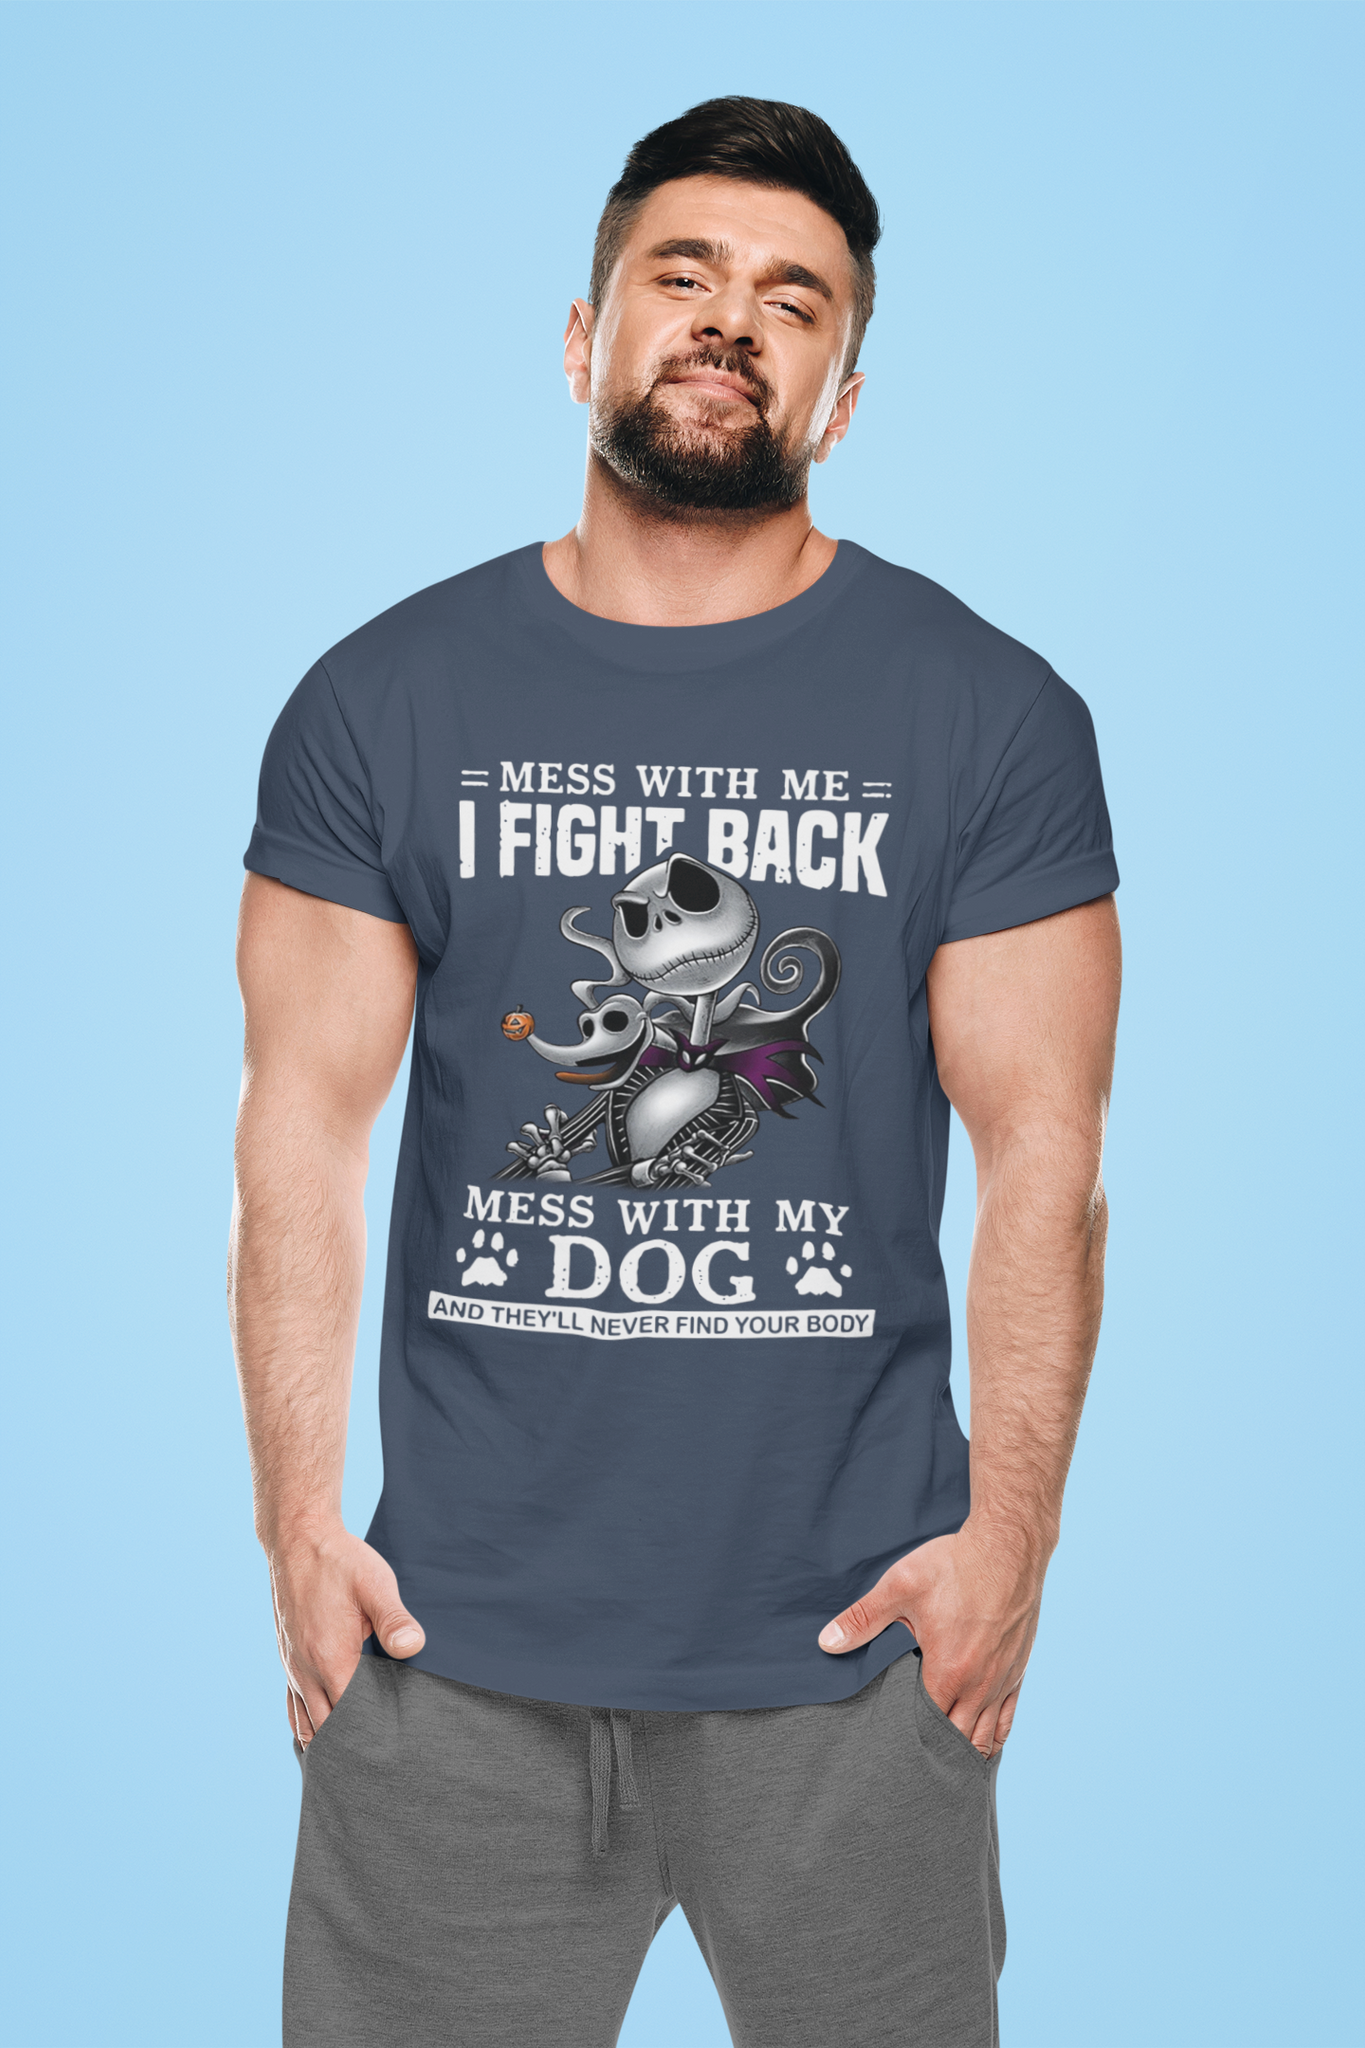 Nightmare Before Christmas T Shirt, Mess With Me I Fight Back Tshirt, Jack Skellington Zero T Shirt, Halloween Gifts